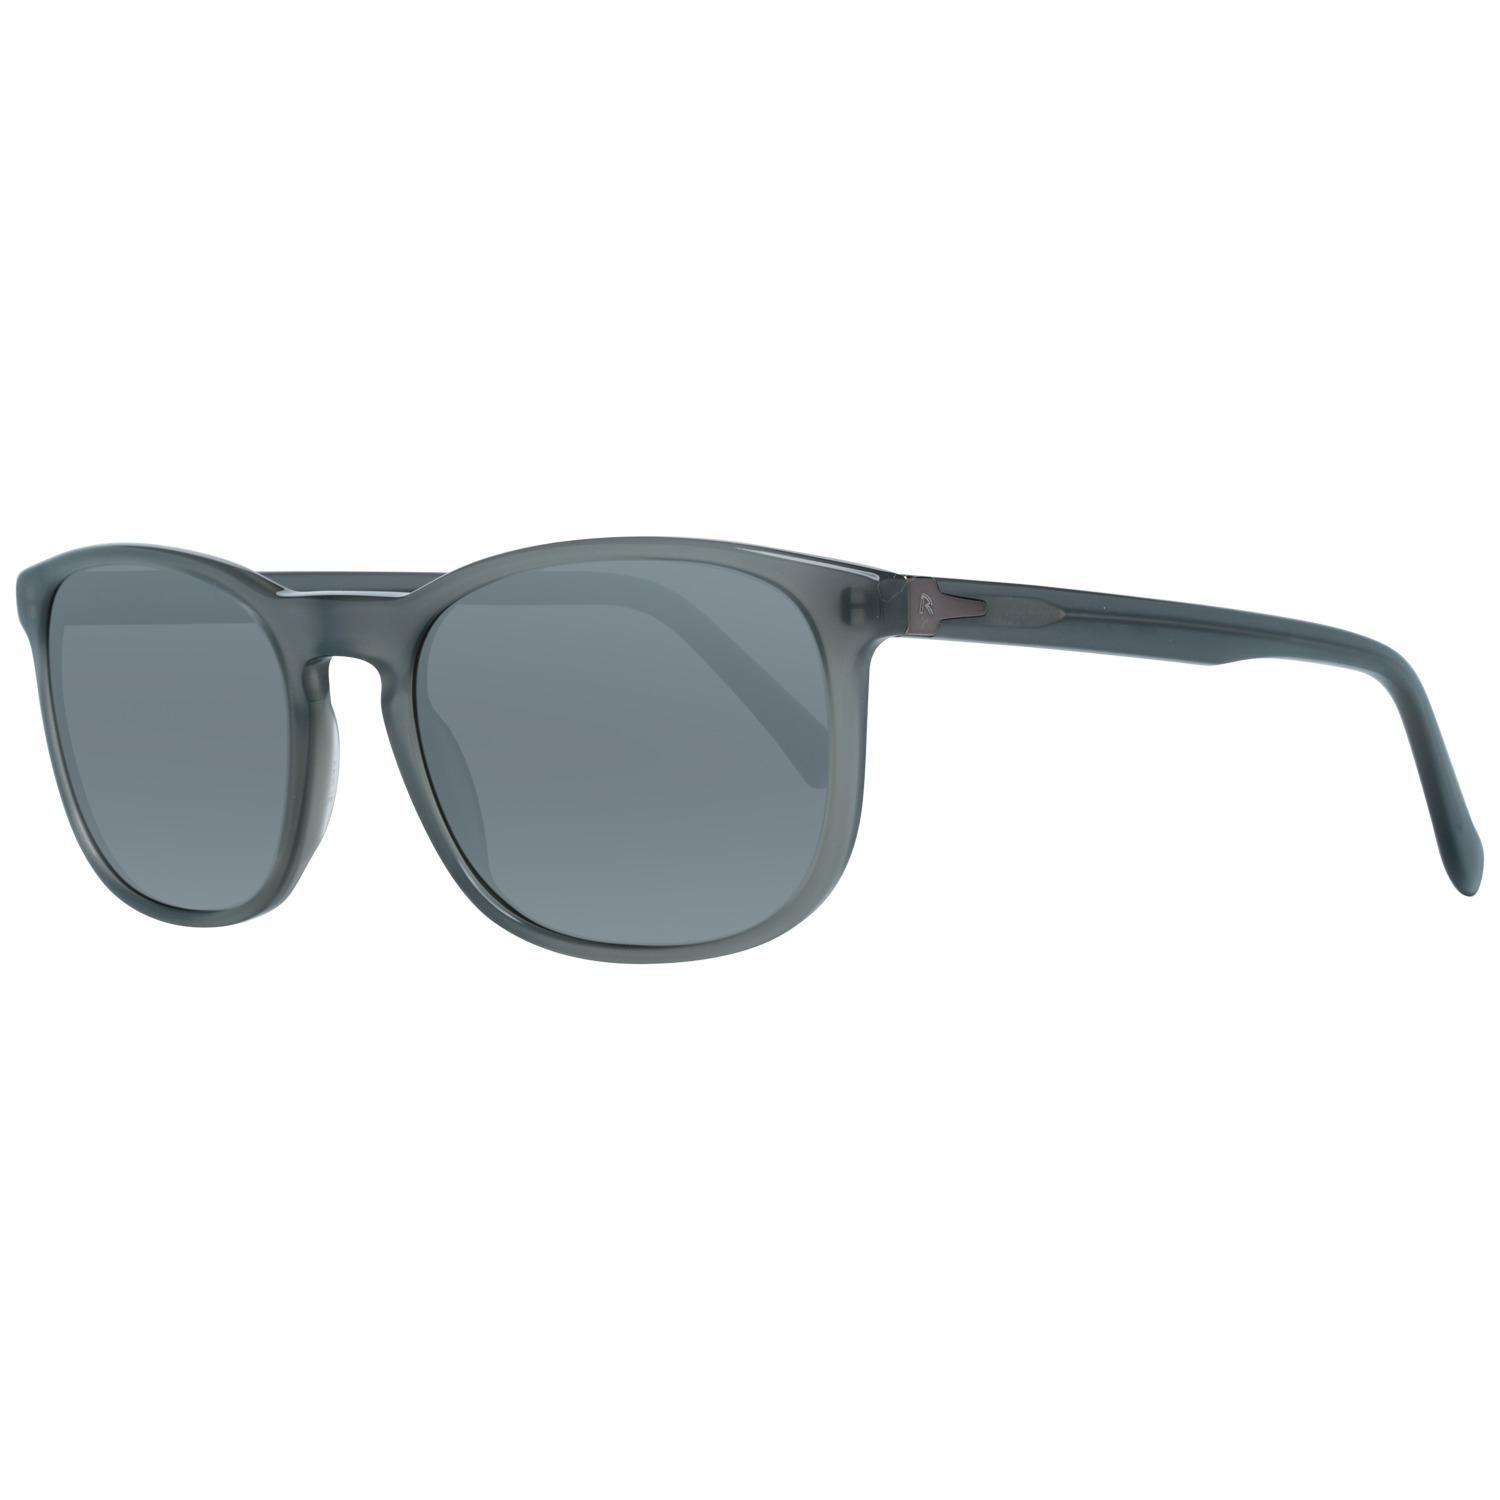 Details
MATERIAL: Acetate
COLOR: Grey
MODEL: R3287-D-5519-145-V425-E42-POL
GENDER: Adult Unisex
COUNTRY OF MANUFACTURE: China
TYPE: Sunglasses
ORIGINAL CASE?: Yes
STYLE: Oval
OCCASION: Casual
FEATURES: Lightweight
LENS COLOR: Grey
LENS TECHNOLOGY: